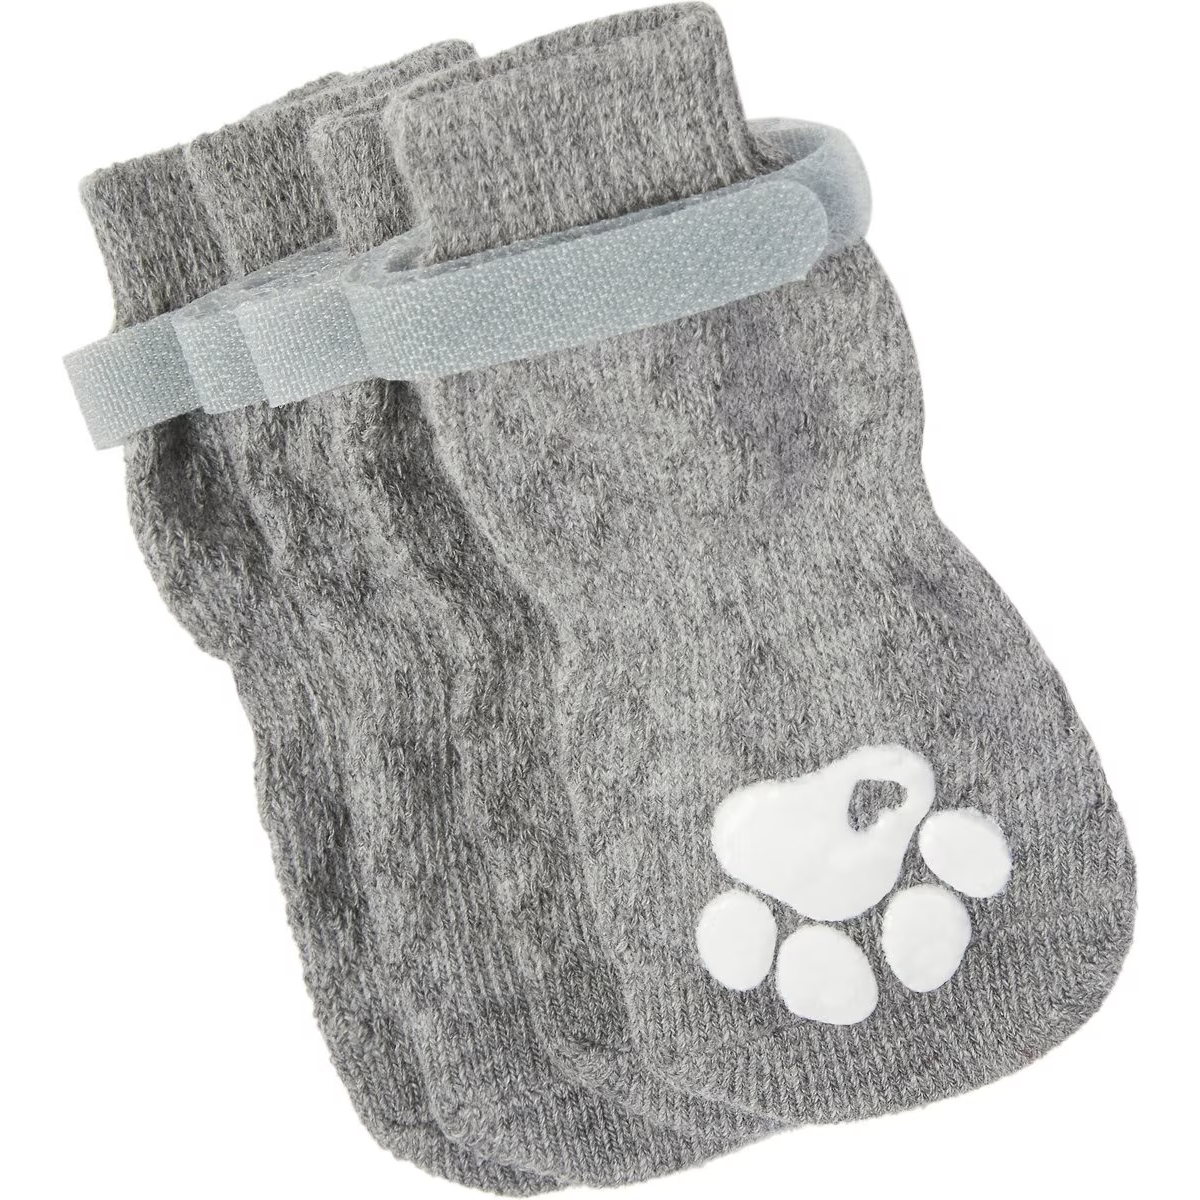 Frisco Non-Skid Cable Knit Dog Socks